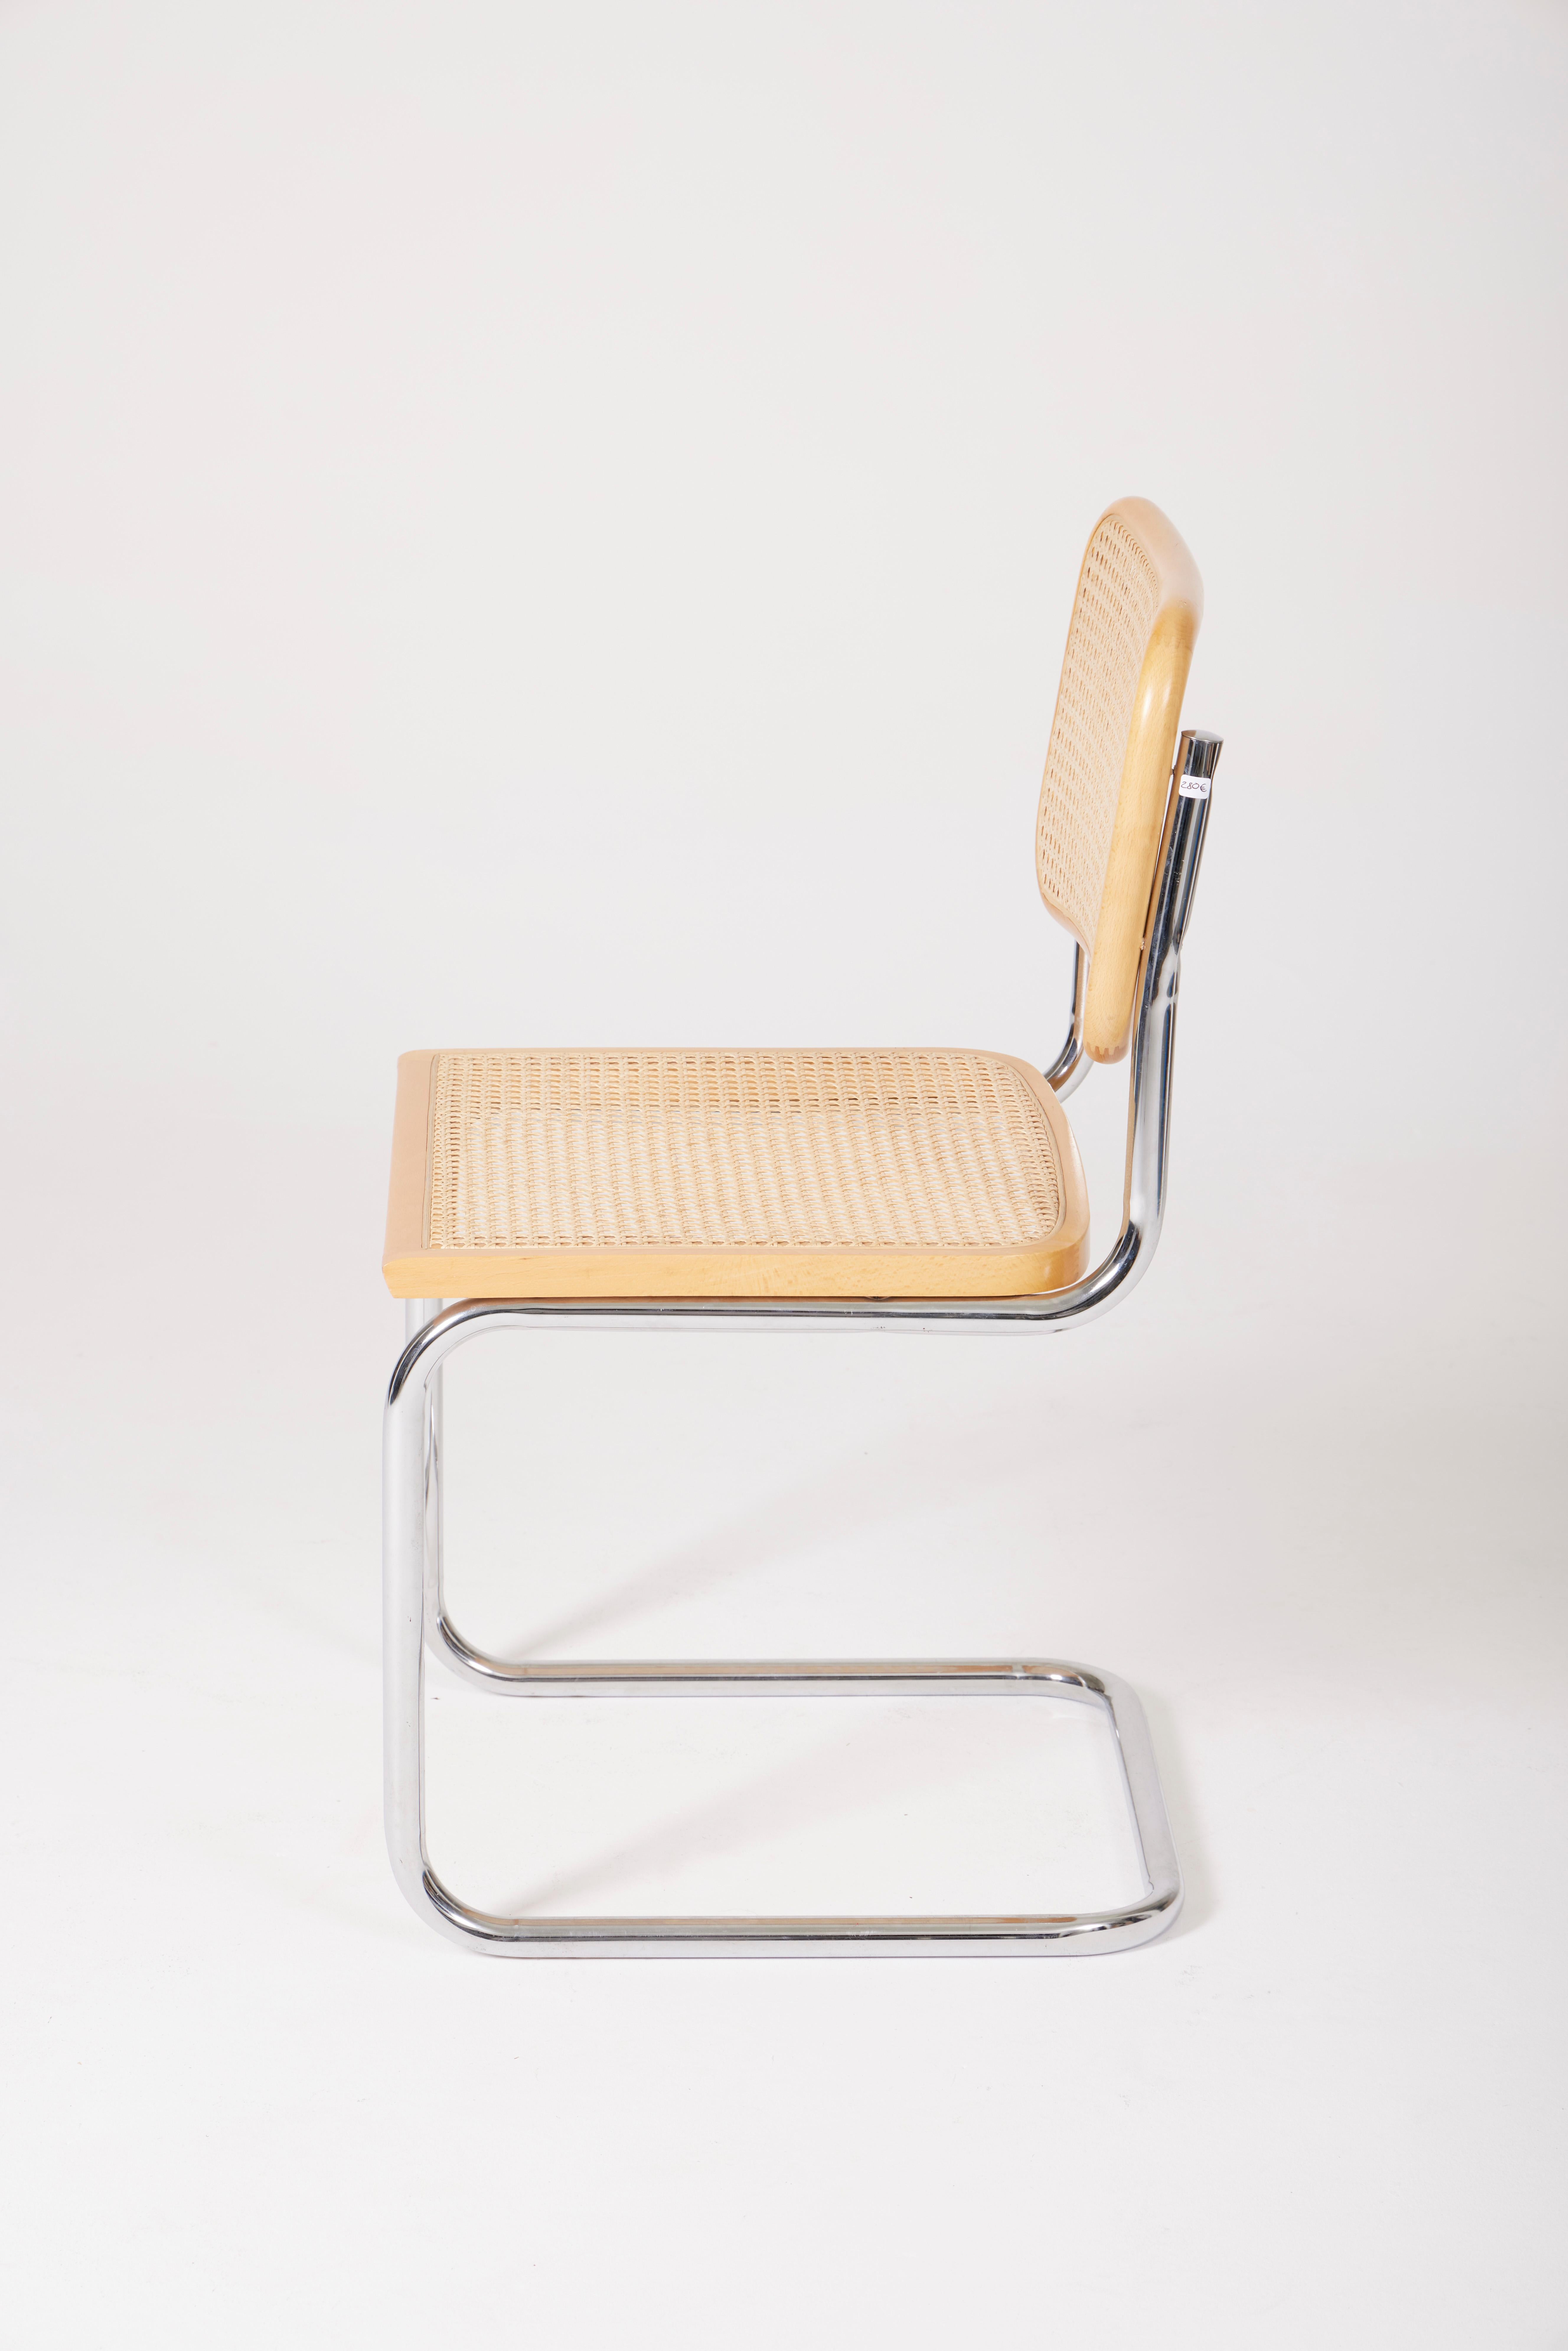 Cesca B32 chair by designer Marcel Breuer. The structure is in chromed steel, the seats and backrests are caned in a beech frame. Very good condition. 